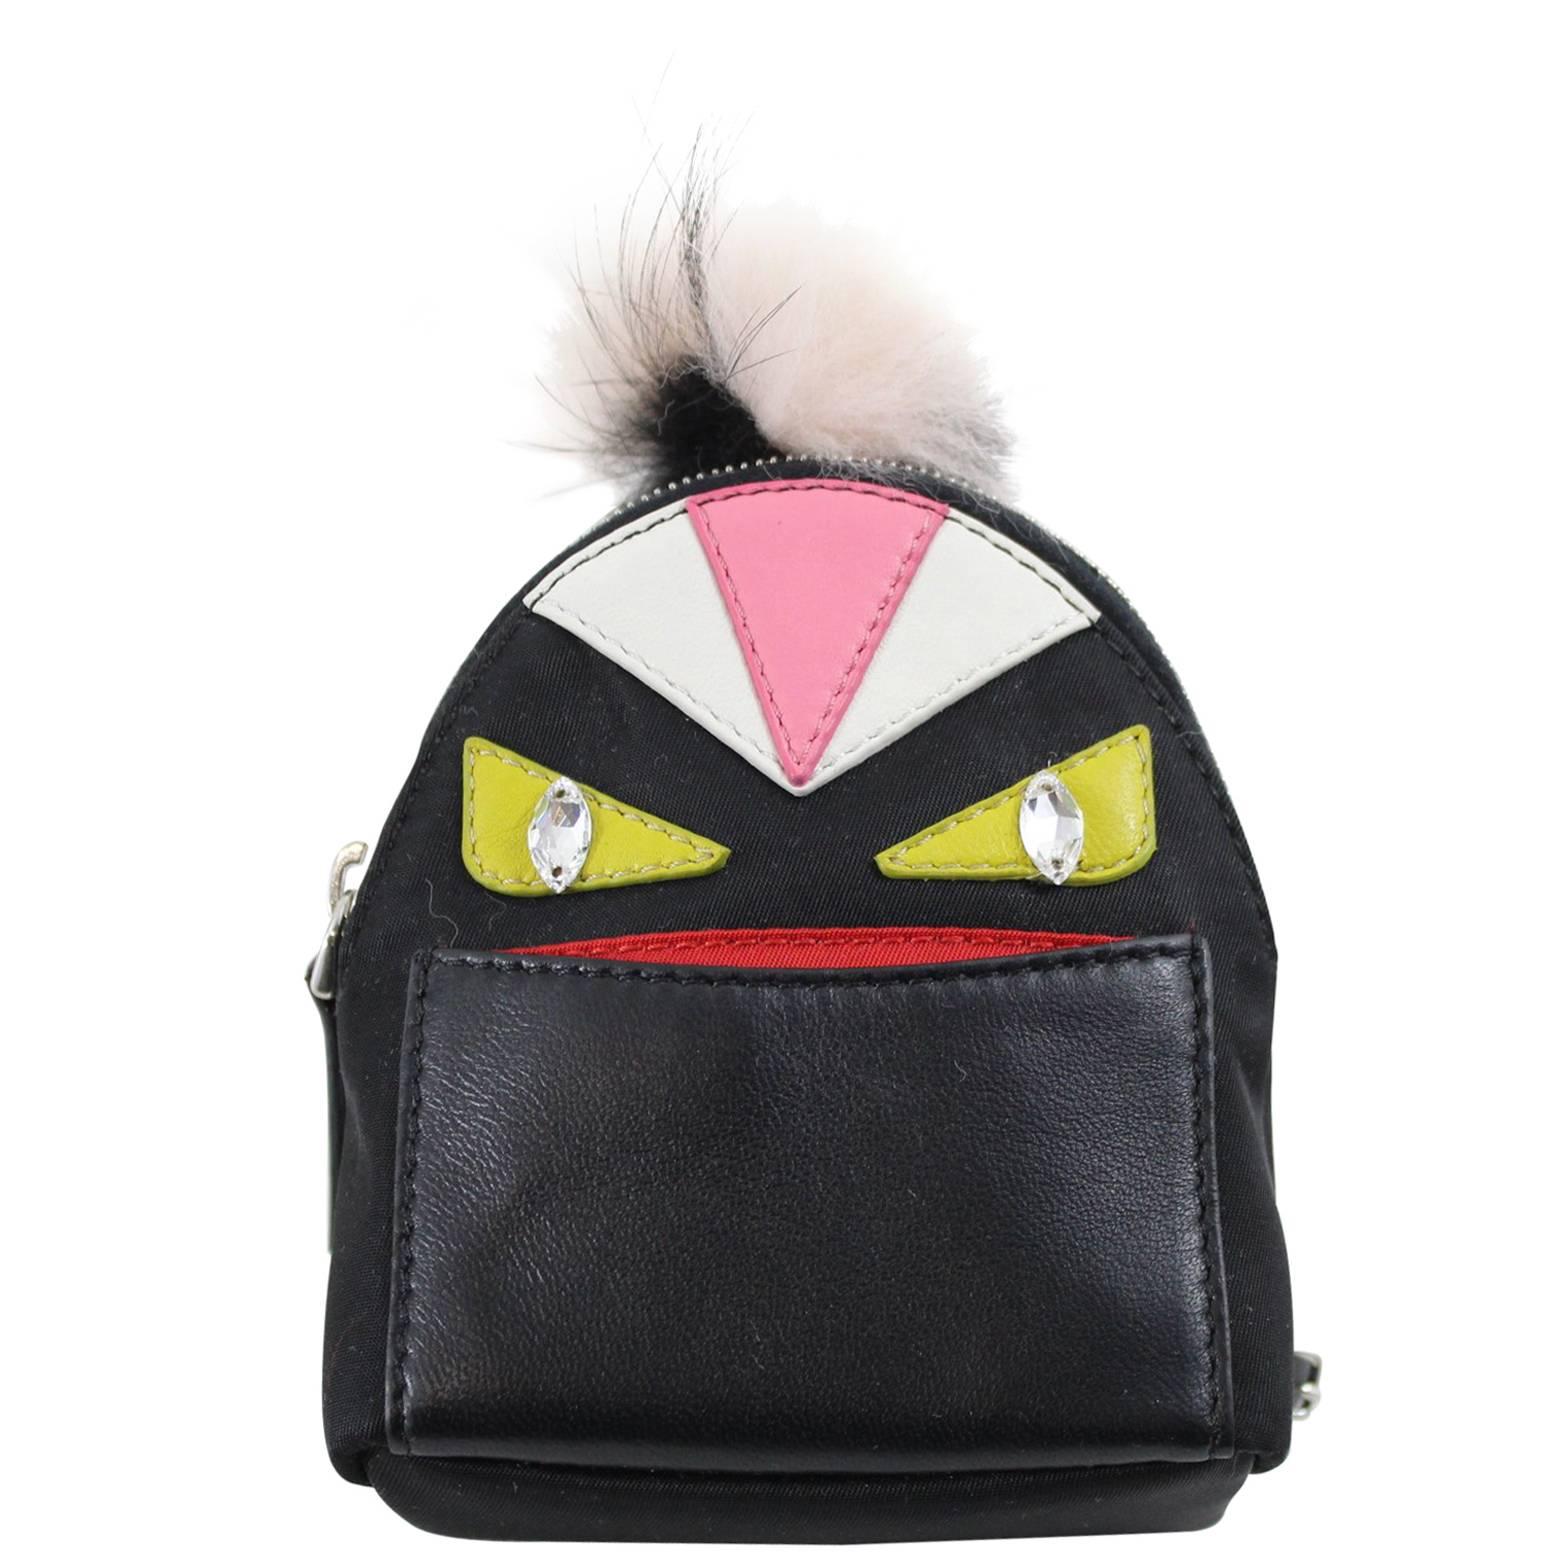 Fendi black nylon and leather Monster Charm' backpack key chain For Sale